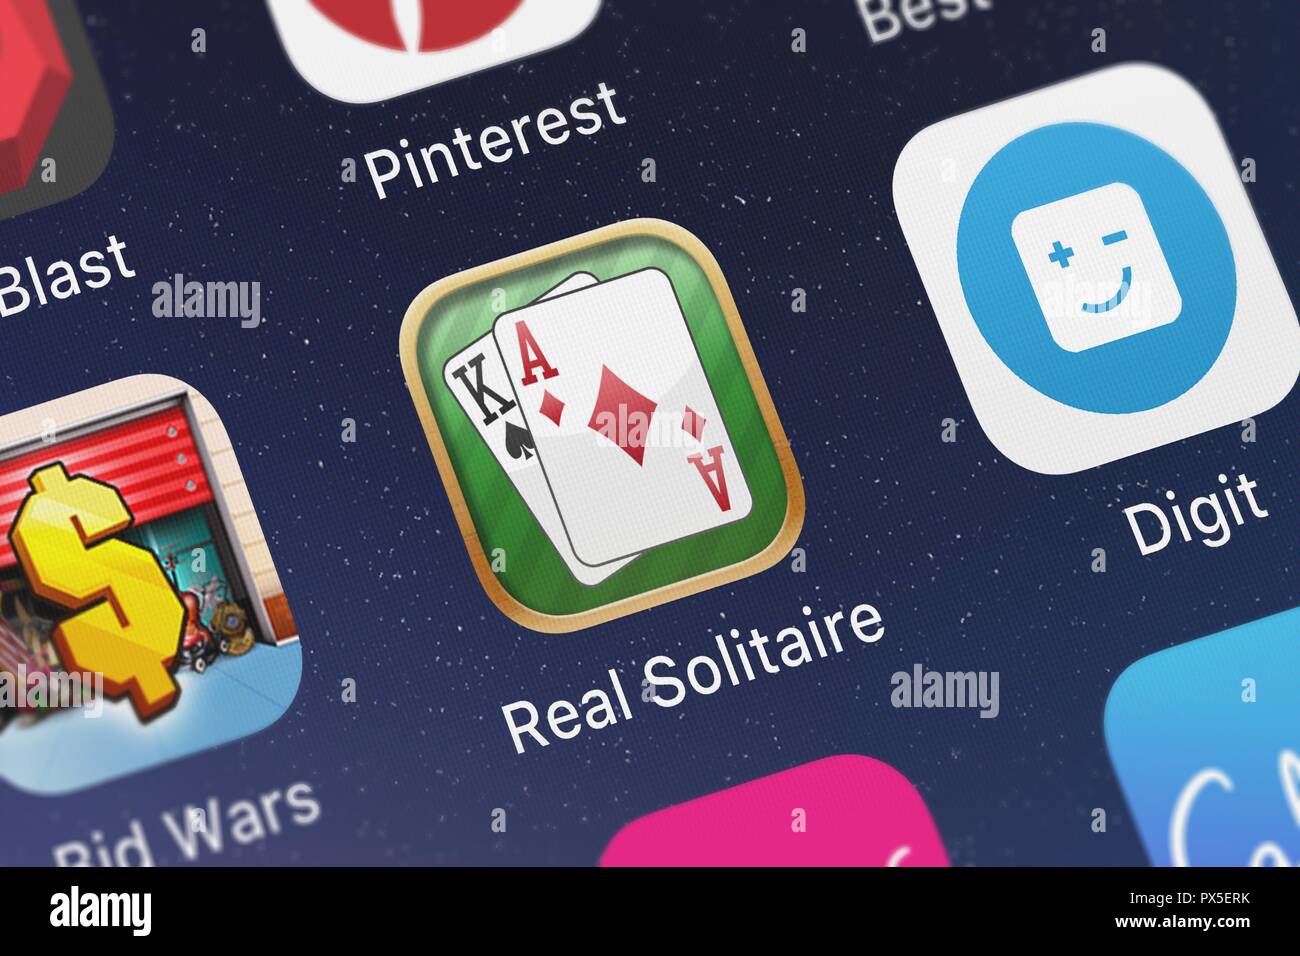 London, United Kingdom - October 19, 2018: Screenshot of the Real Solitaire mobile app from EdgeRift, Inc. icon on an iPhone. Stock Photo